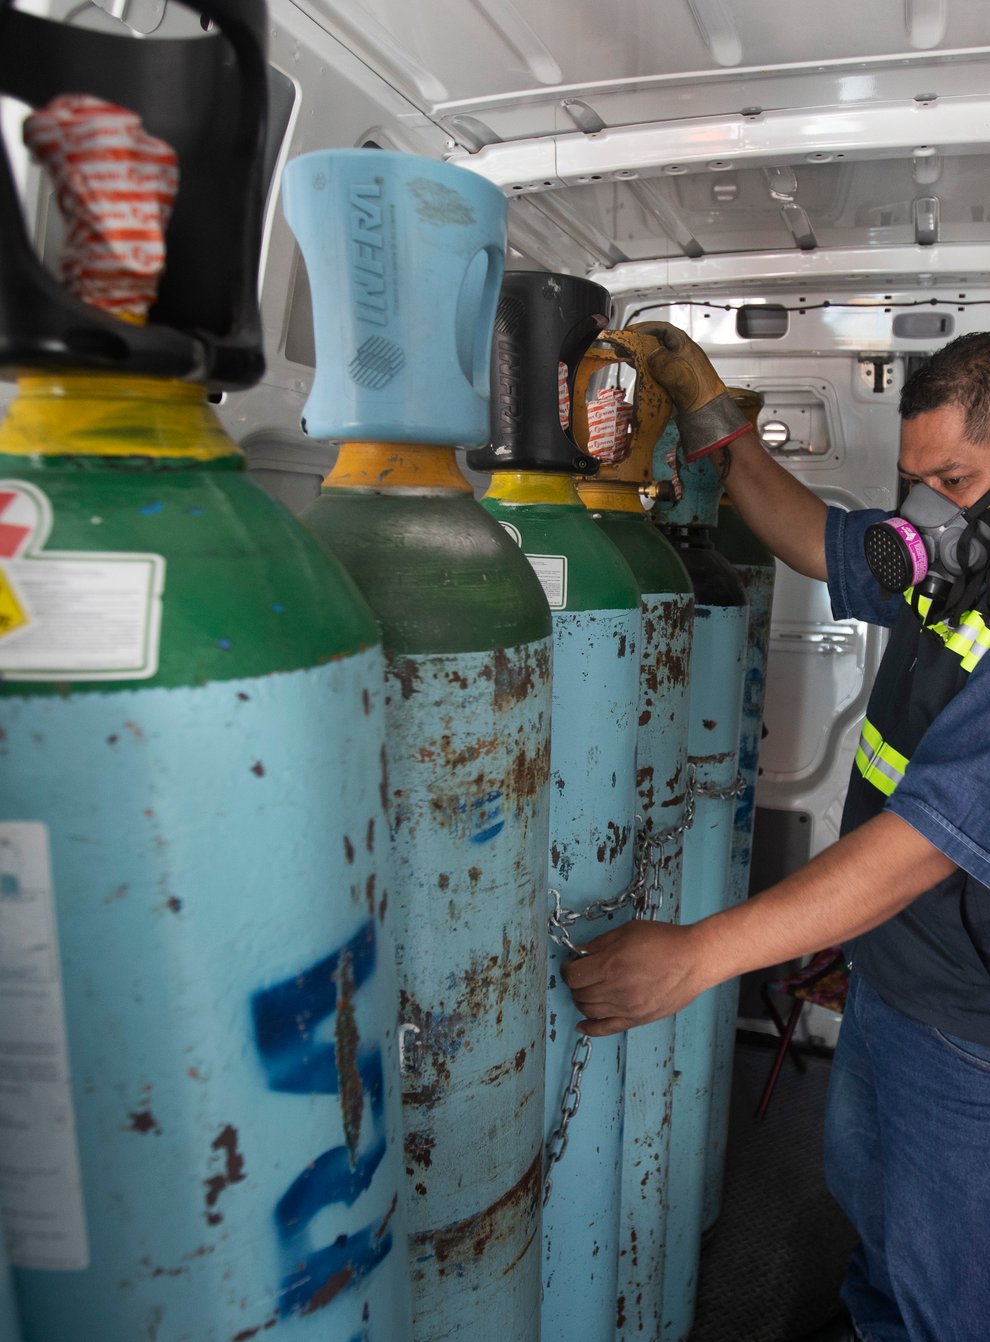 Health worker Jose Antonio Pena refills oxygen tanks for patients with Covid-19 in the Iztapalapa district of Mexico City